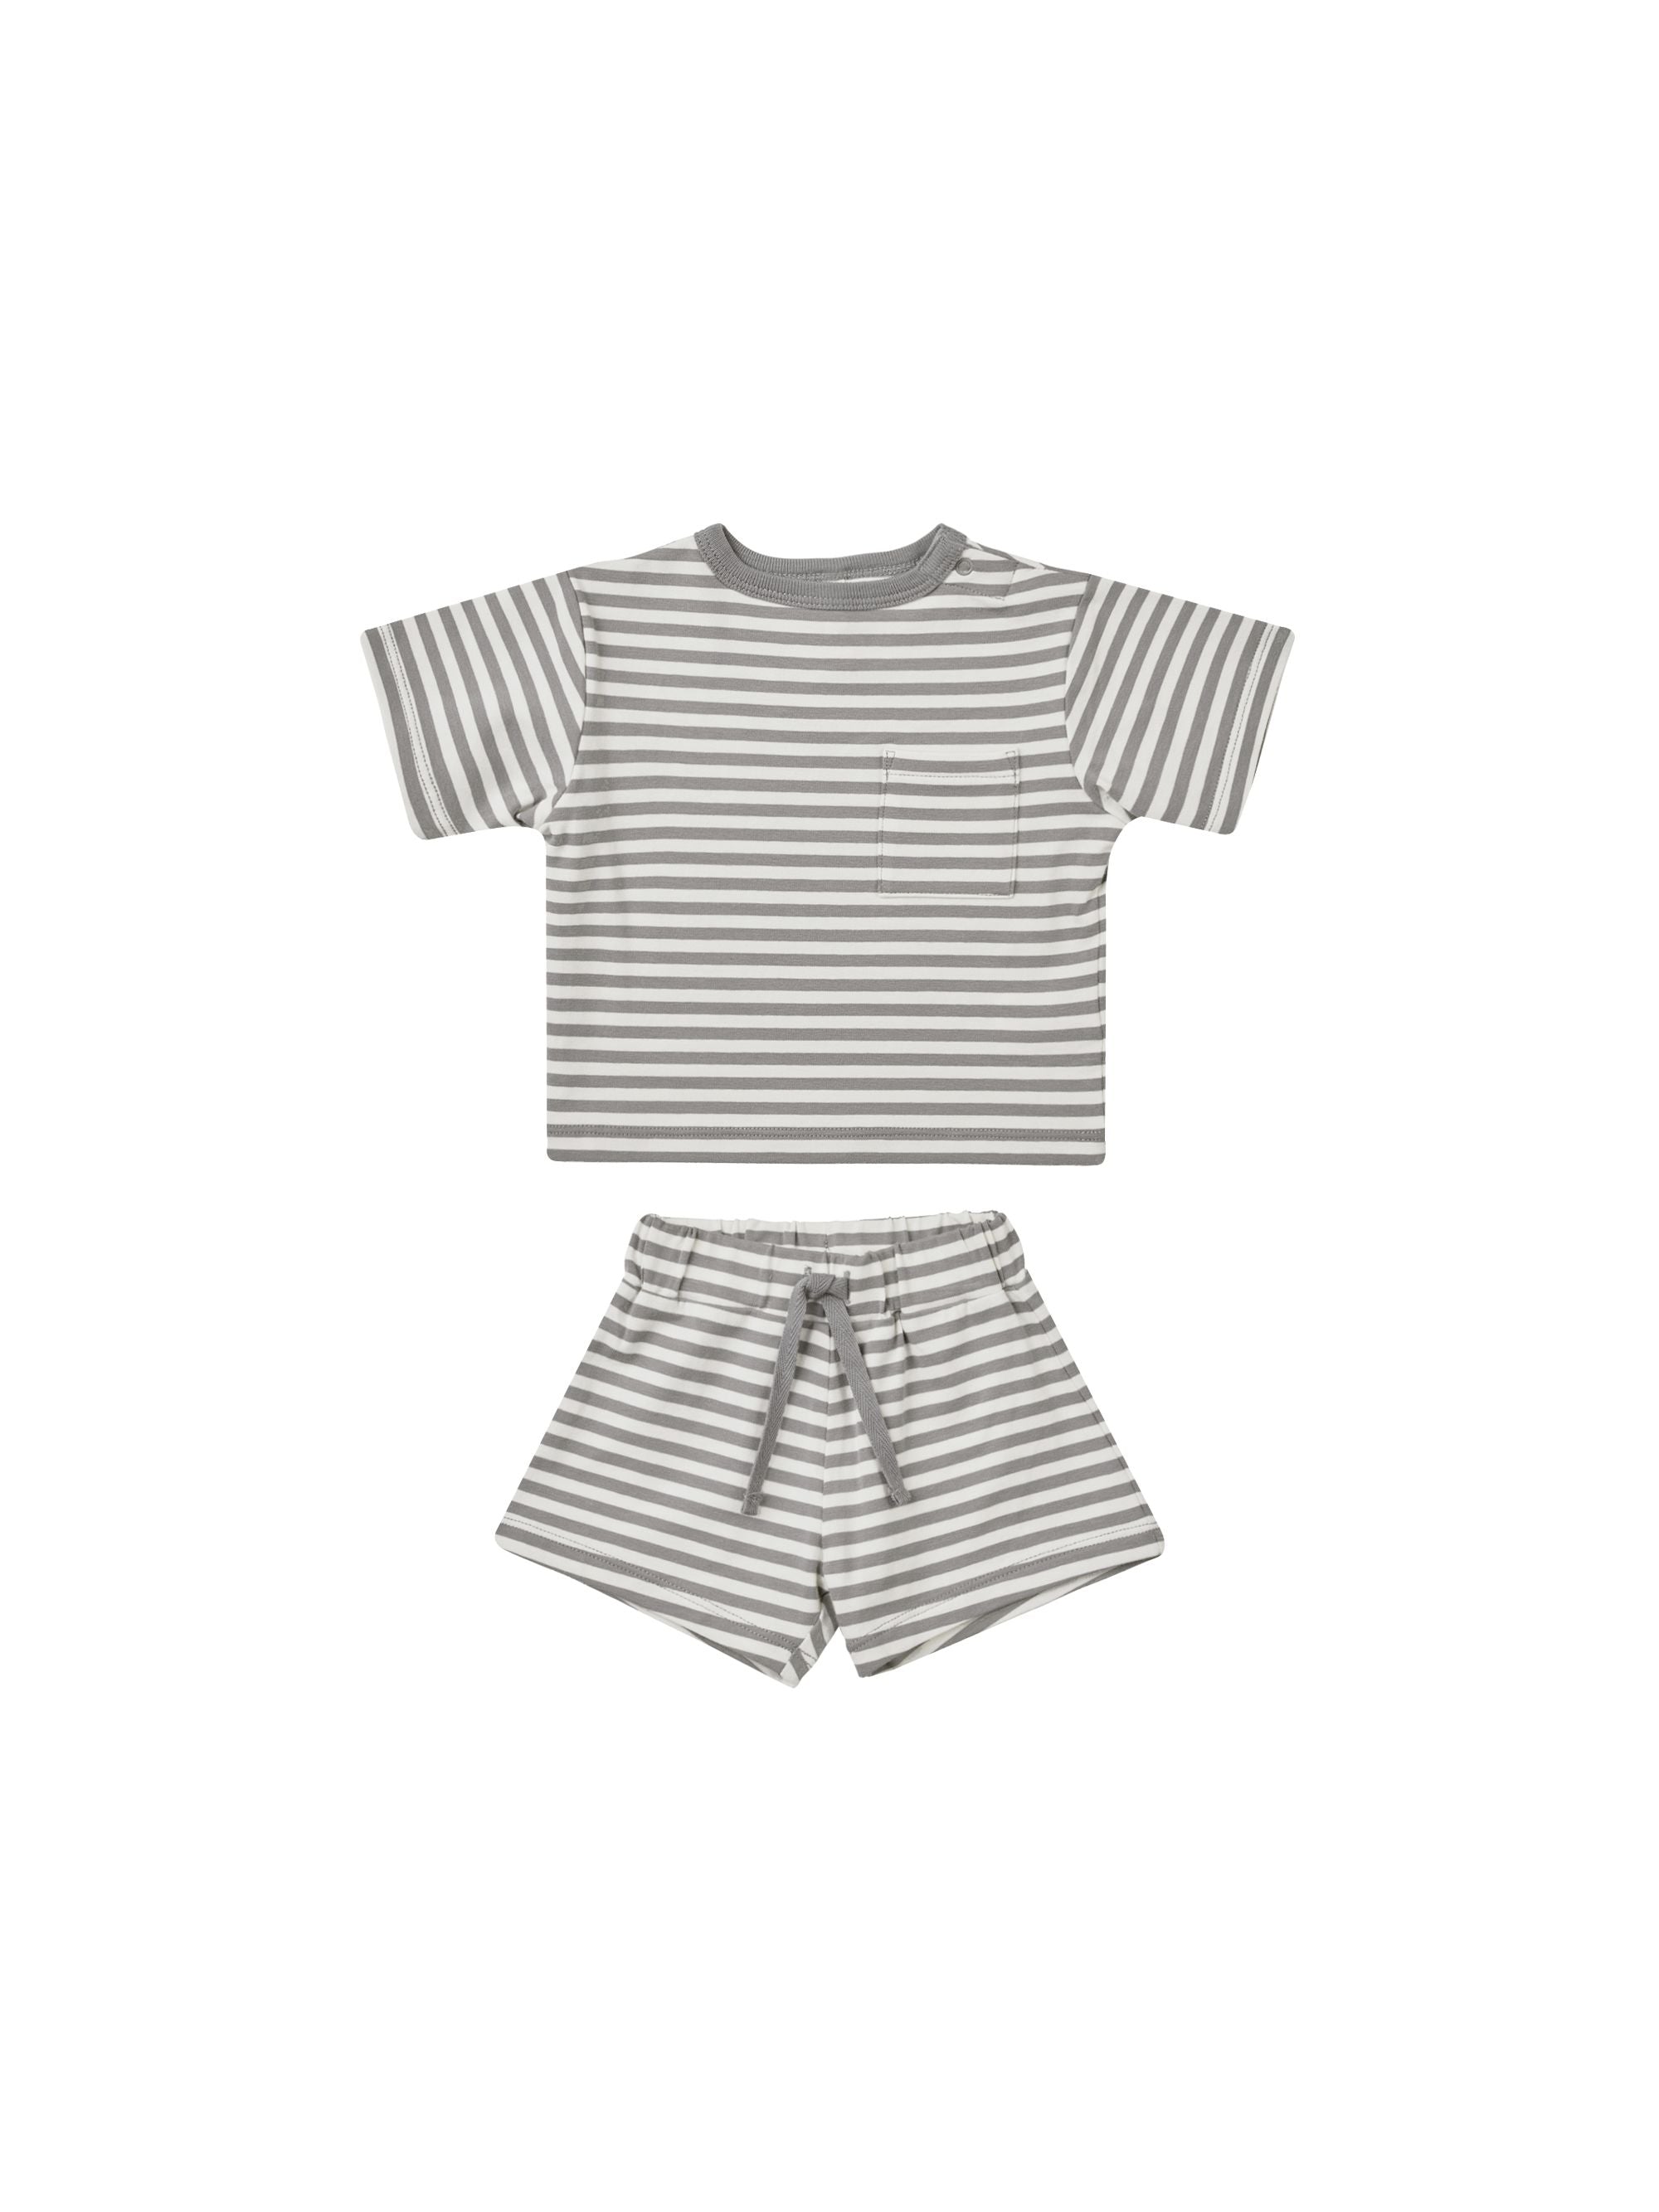 Quincy Mae - Boxy T-Shirt and Short Set